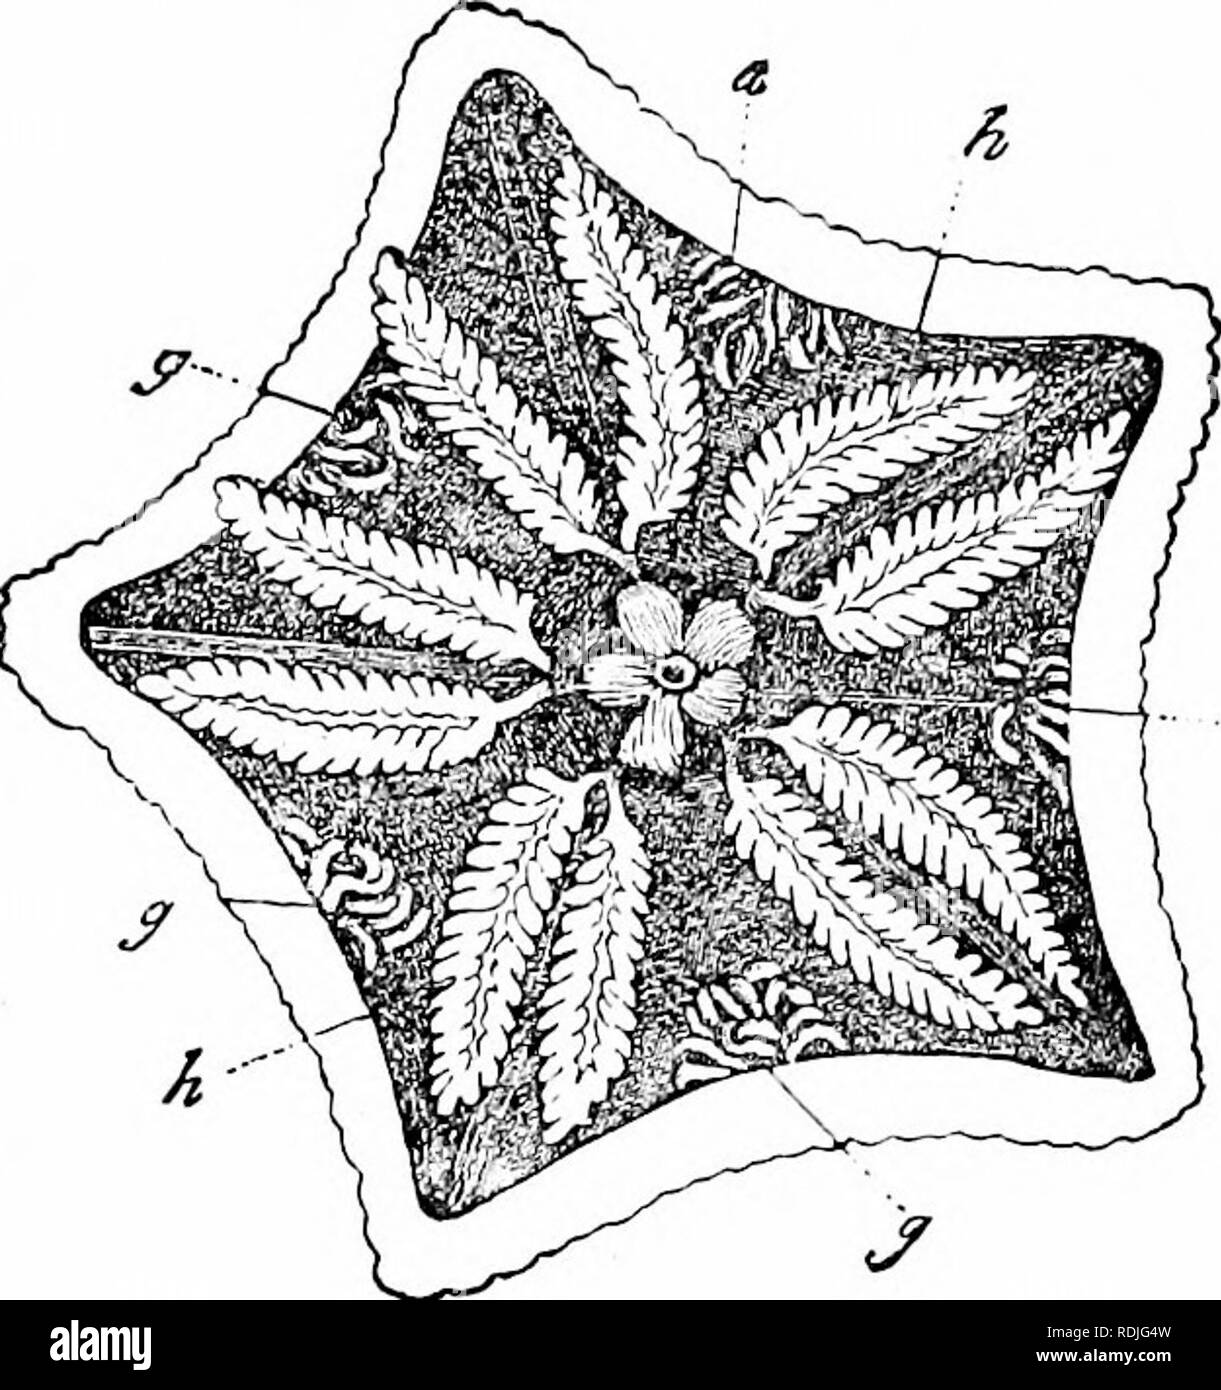 . A manual of zoology. Zoology. I. ASTEROIDEA 297 ambulacral plate abuts against a small interamhulacral plate, bearing usually movaljle spines. Beyond these come the less constant a(/amte/ac- ral or mar^t^inal plates, and then those of the aboral surface. Each ambu- lacral area terminates at the tip of the arm with an unpaired ocular plate.. Fig. 2S8,—Asleriscus verrucidatus, aboral surface removed (after Gegenbaur). g, gonads; h, hepatic cseca; i, stomach with anus. The organs lie in part in the coelom, in part in the ambulacral grooves. The alimentary tract is in the coelom and extends stra Stock Photo